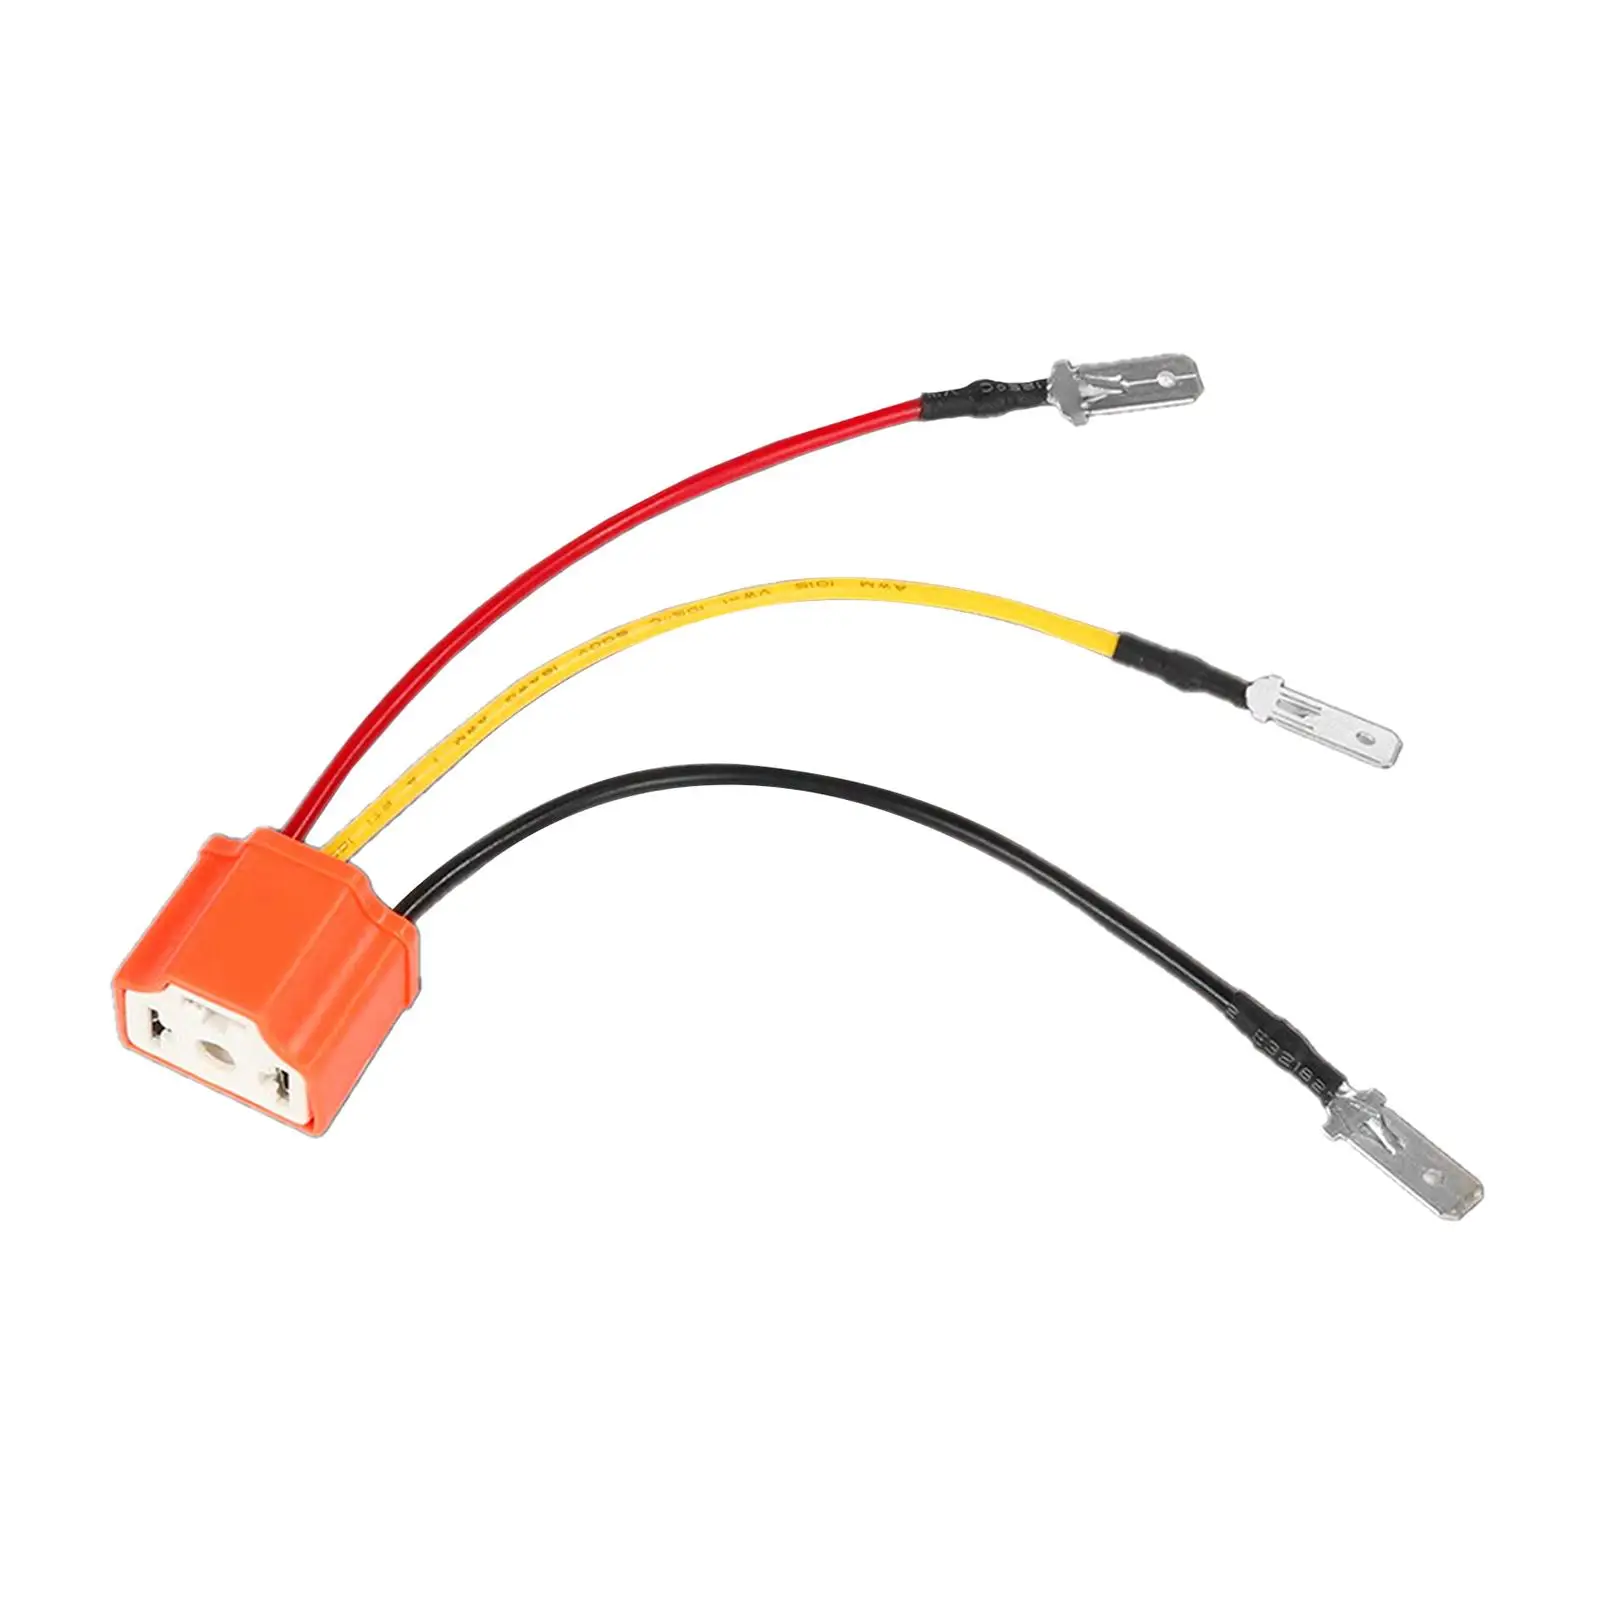 

2 Pieces H4 Wire Wiring Harness Sockets, Replacement 3 Pin 14AWG Adapter Fit for Boat Car Pickup Heavy Duty .